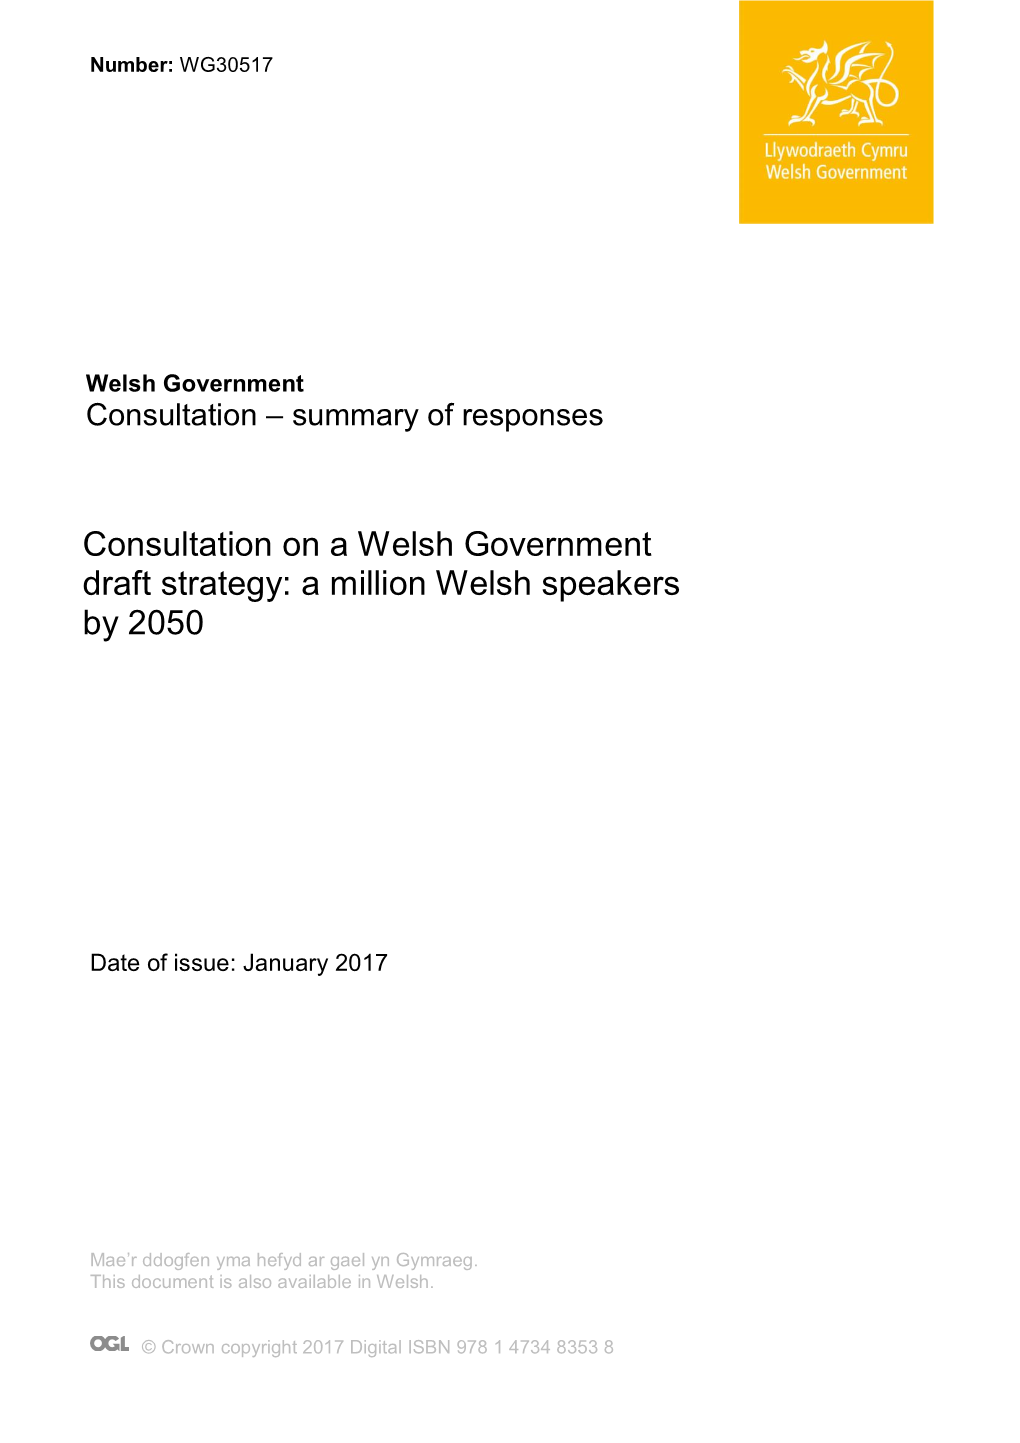 Consultation on a Welsh Government Draft Strategy: a Million Welsh Speakers by 2050